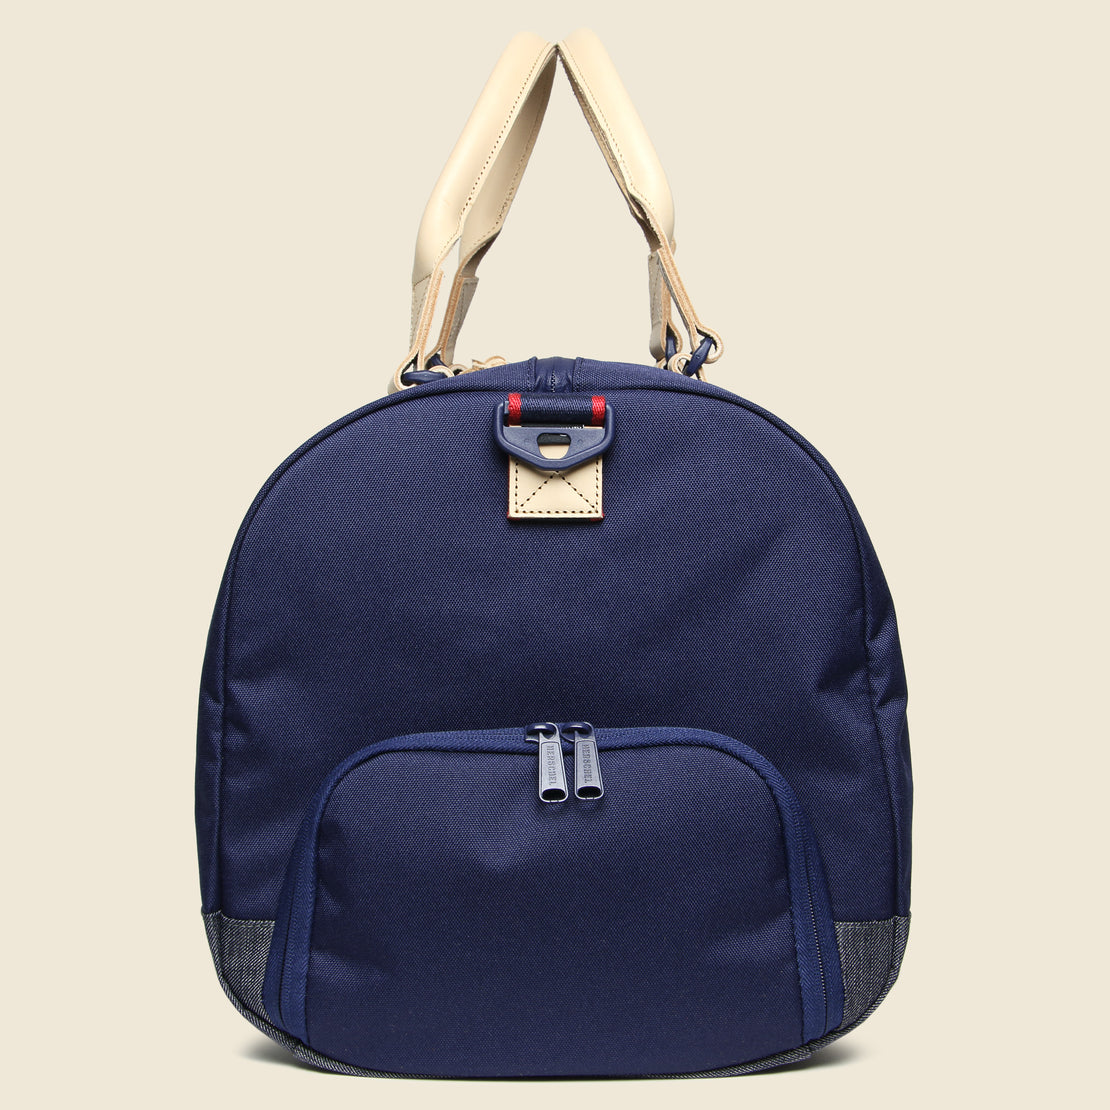 Novel Duffle - Denim - Herschel Supply Co - STAG Provisions - Accessories - Bags / Luggage